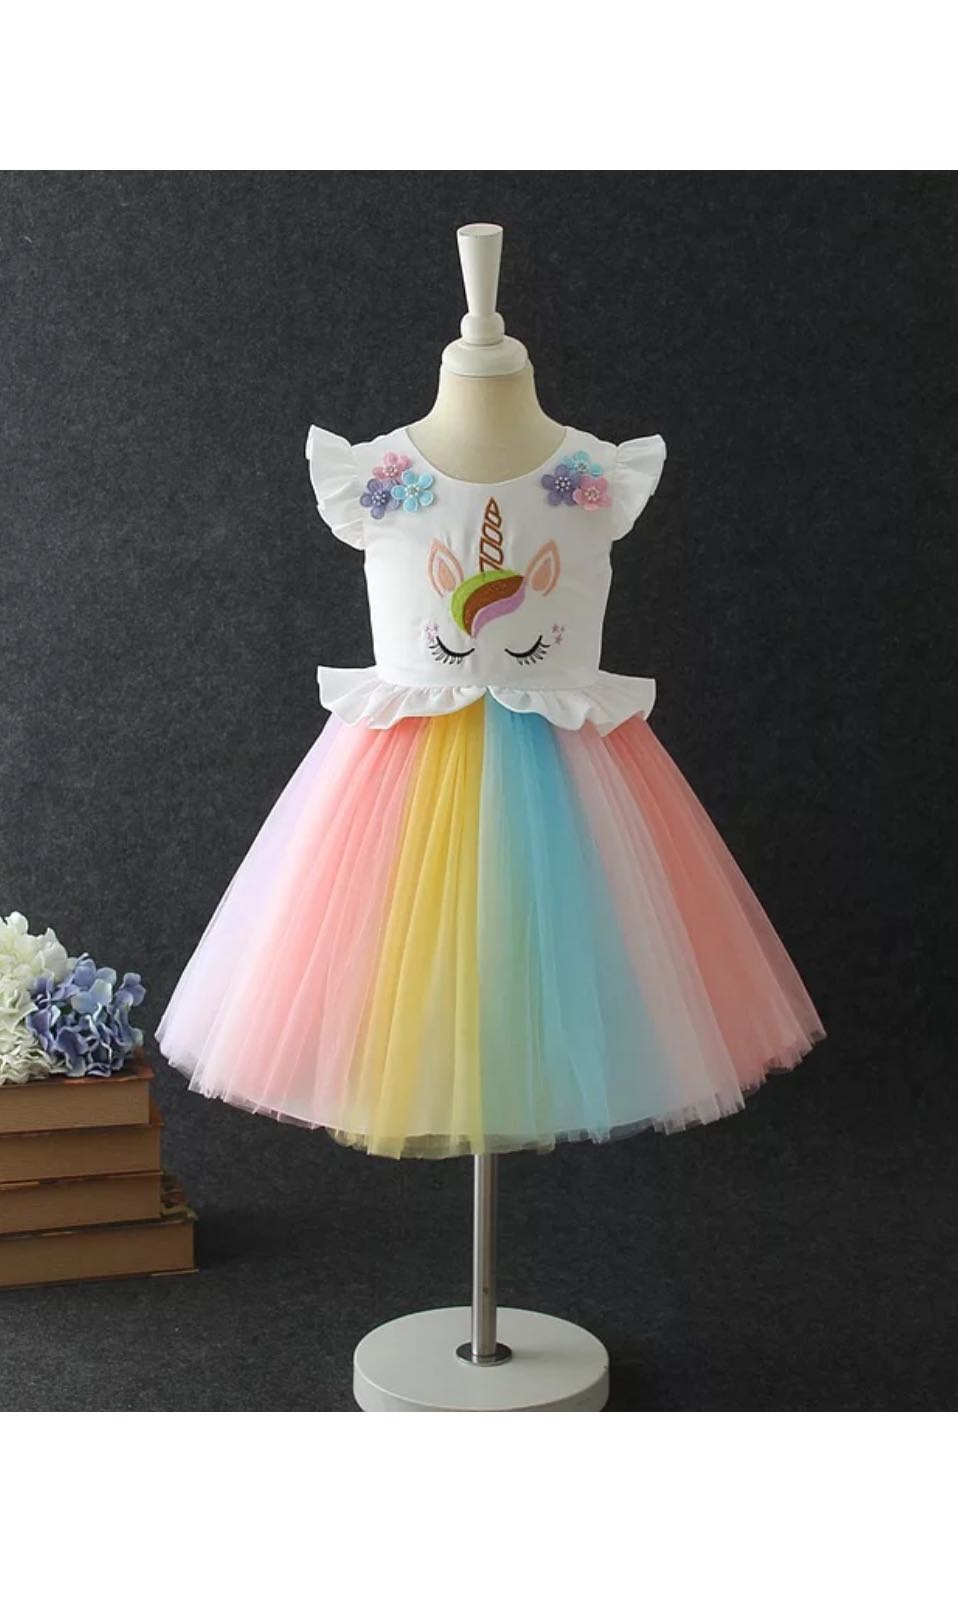 unicorn dress for 9 year old